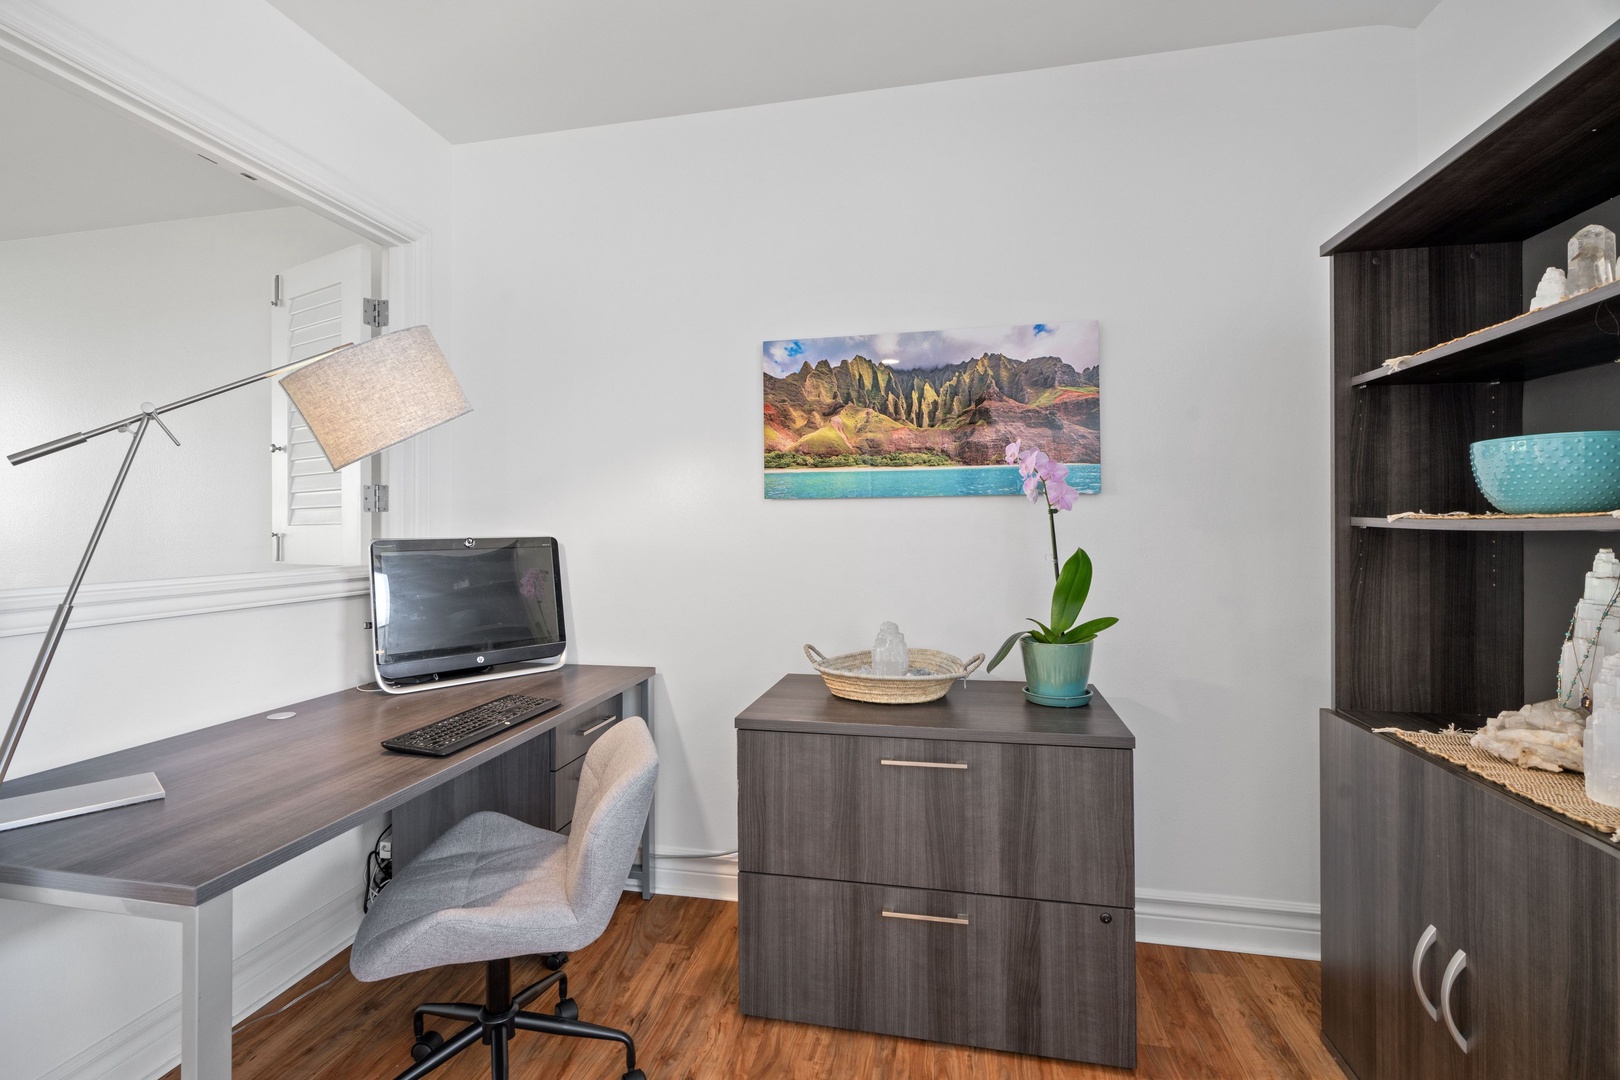 Princeville Vacation Rentals, Tropical Elegance - Stay productive and connected in the convenience of the suite's well-appointed home office space.